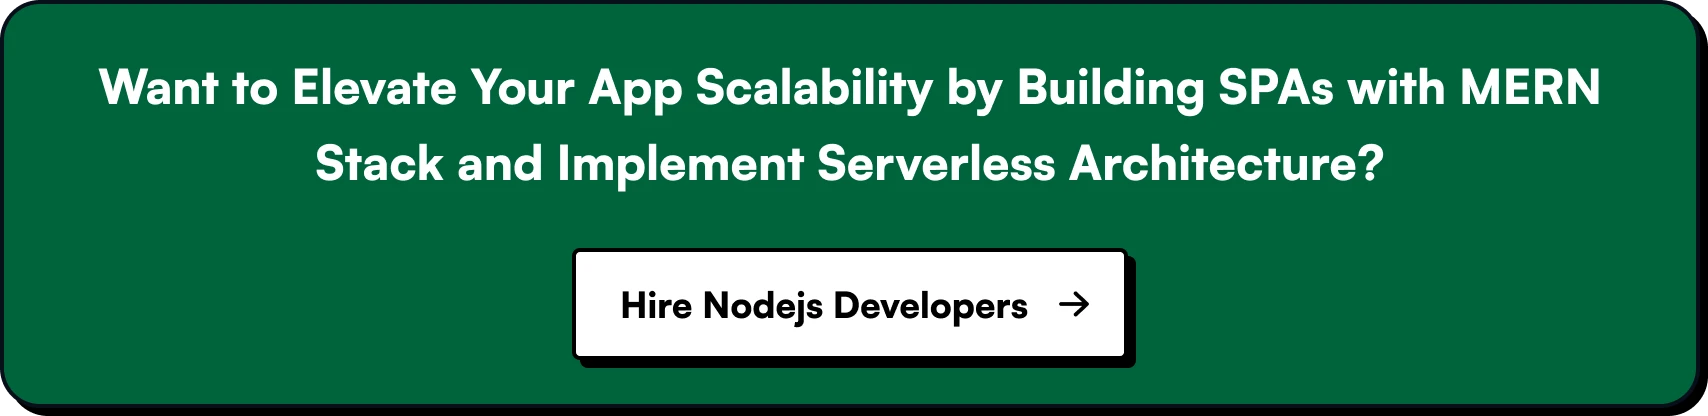 Want to Elevate Your App Scalability by Building SPAs with MERN Stack and Implement Serverless Architecture? Hire Node.js developers